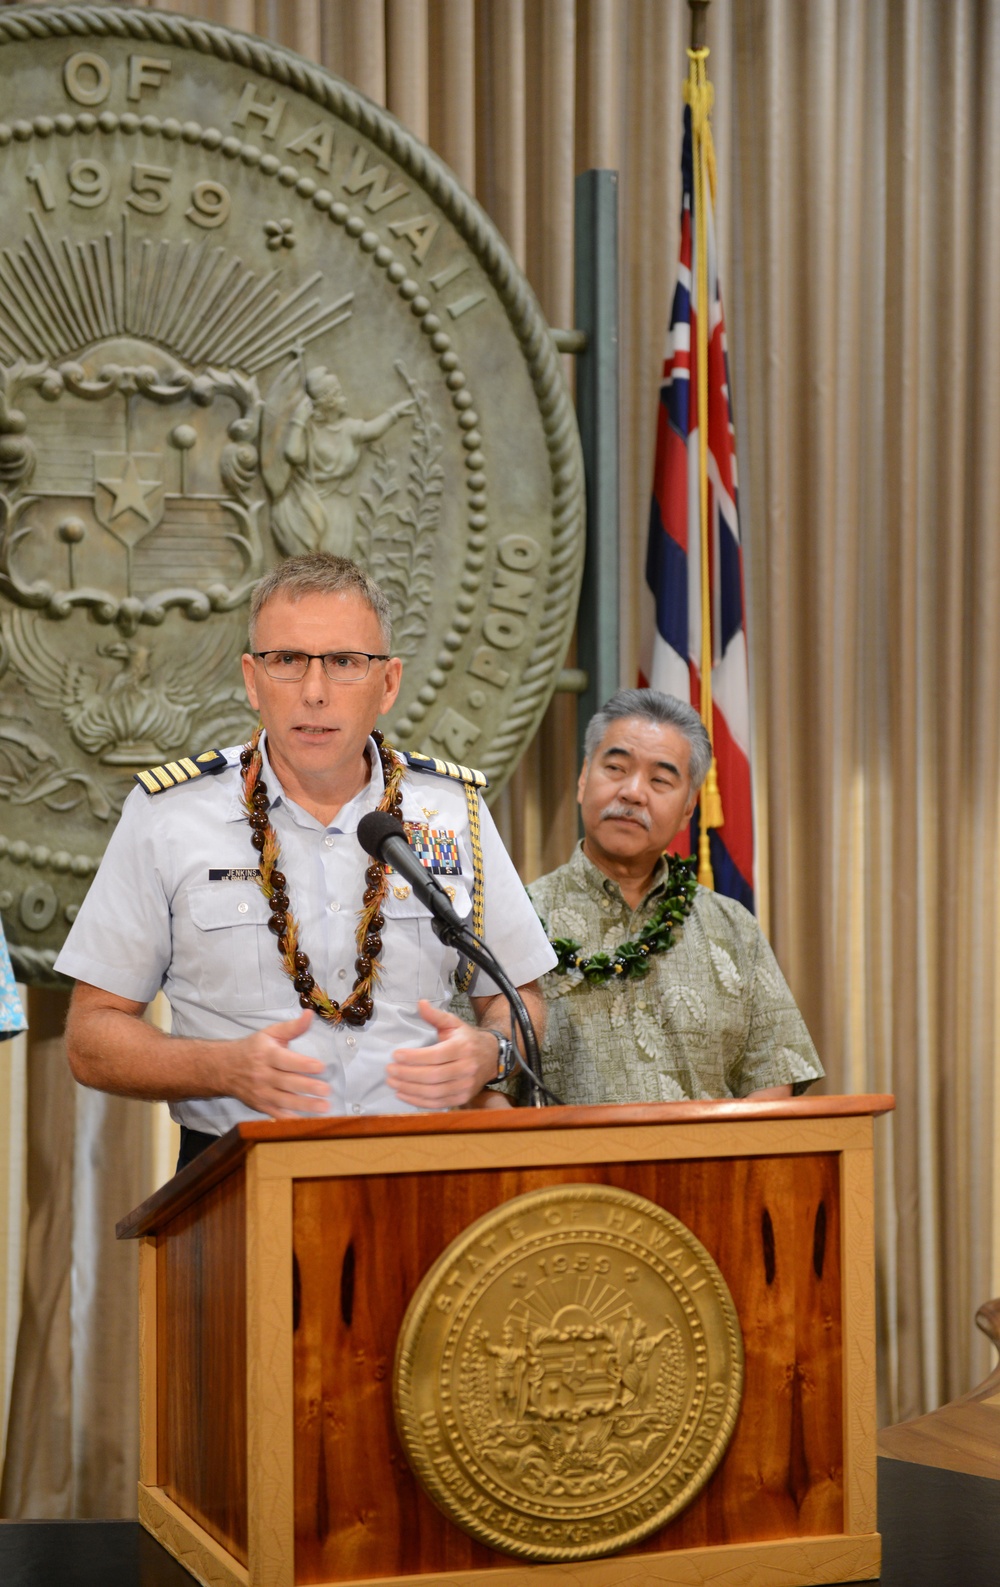 State of Hawaii, Coast Guard partnership completes statewide safety network